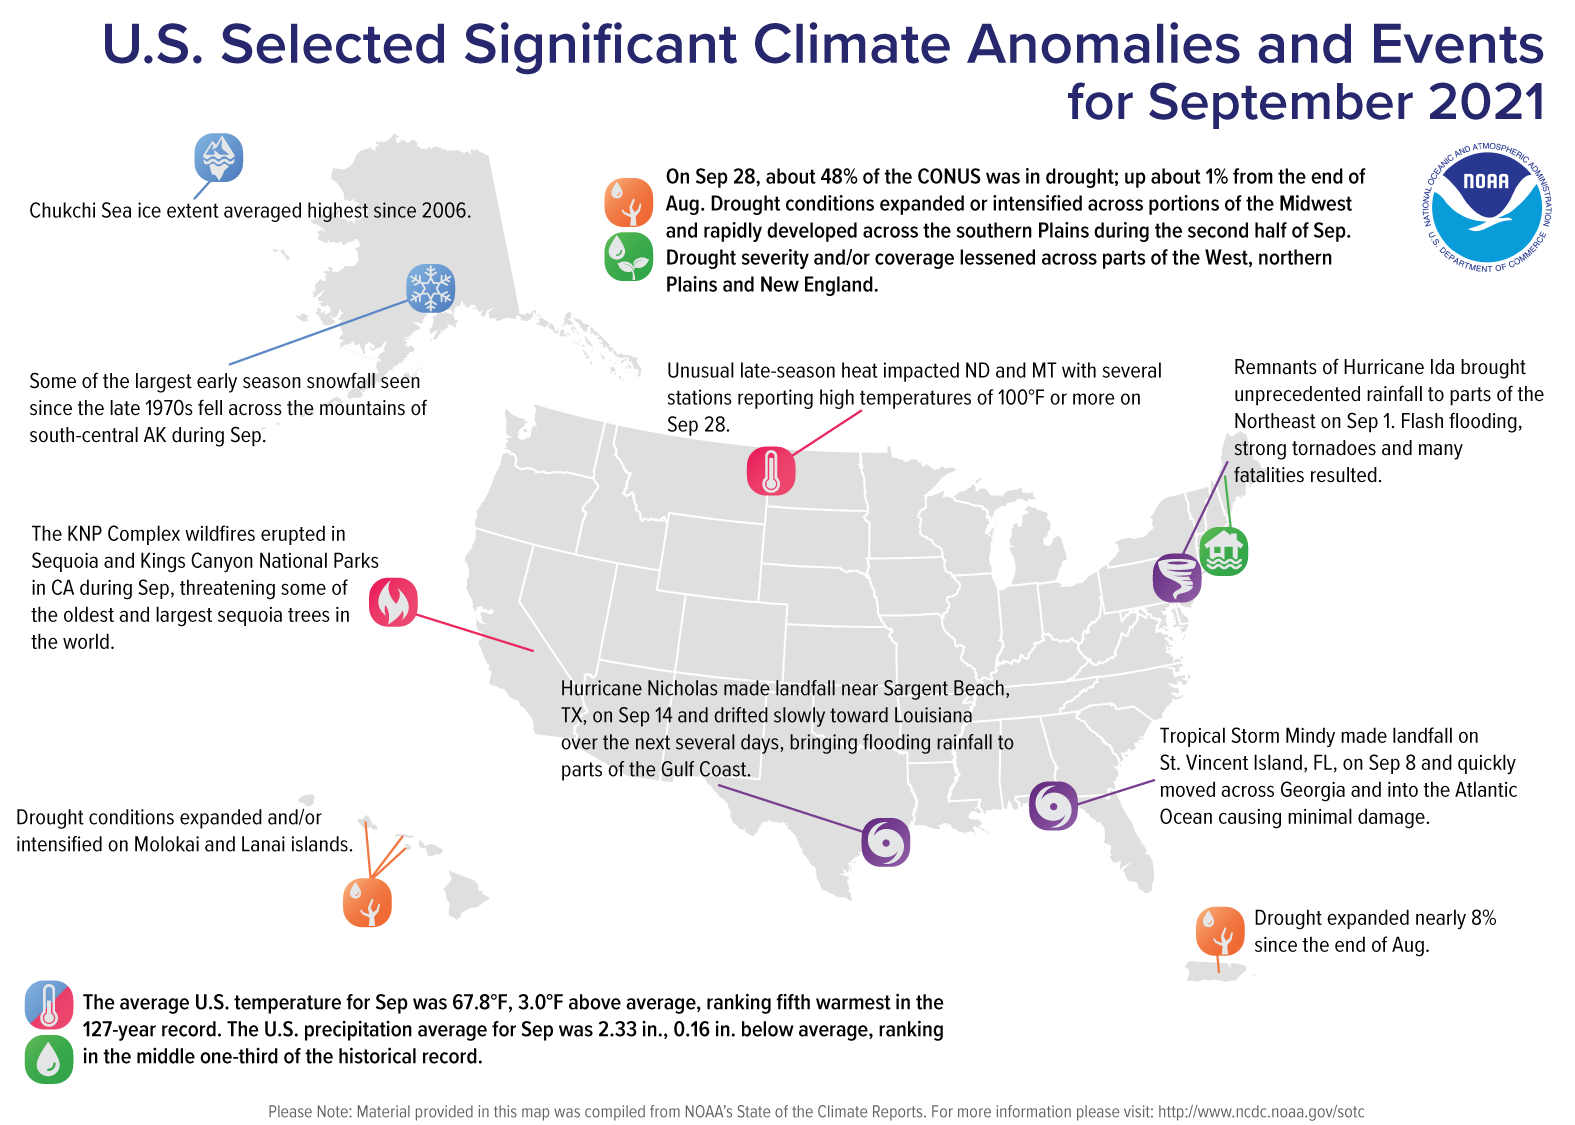 A map of the United States plotted with significant climate events that occurred during September 2021. Please see article text below as well as the full climate report highlights at http://bit.ly/USClimate202109.